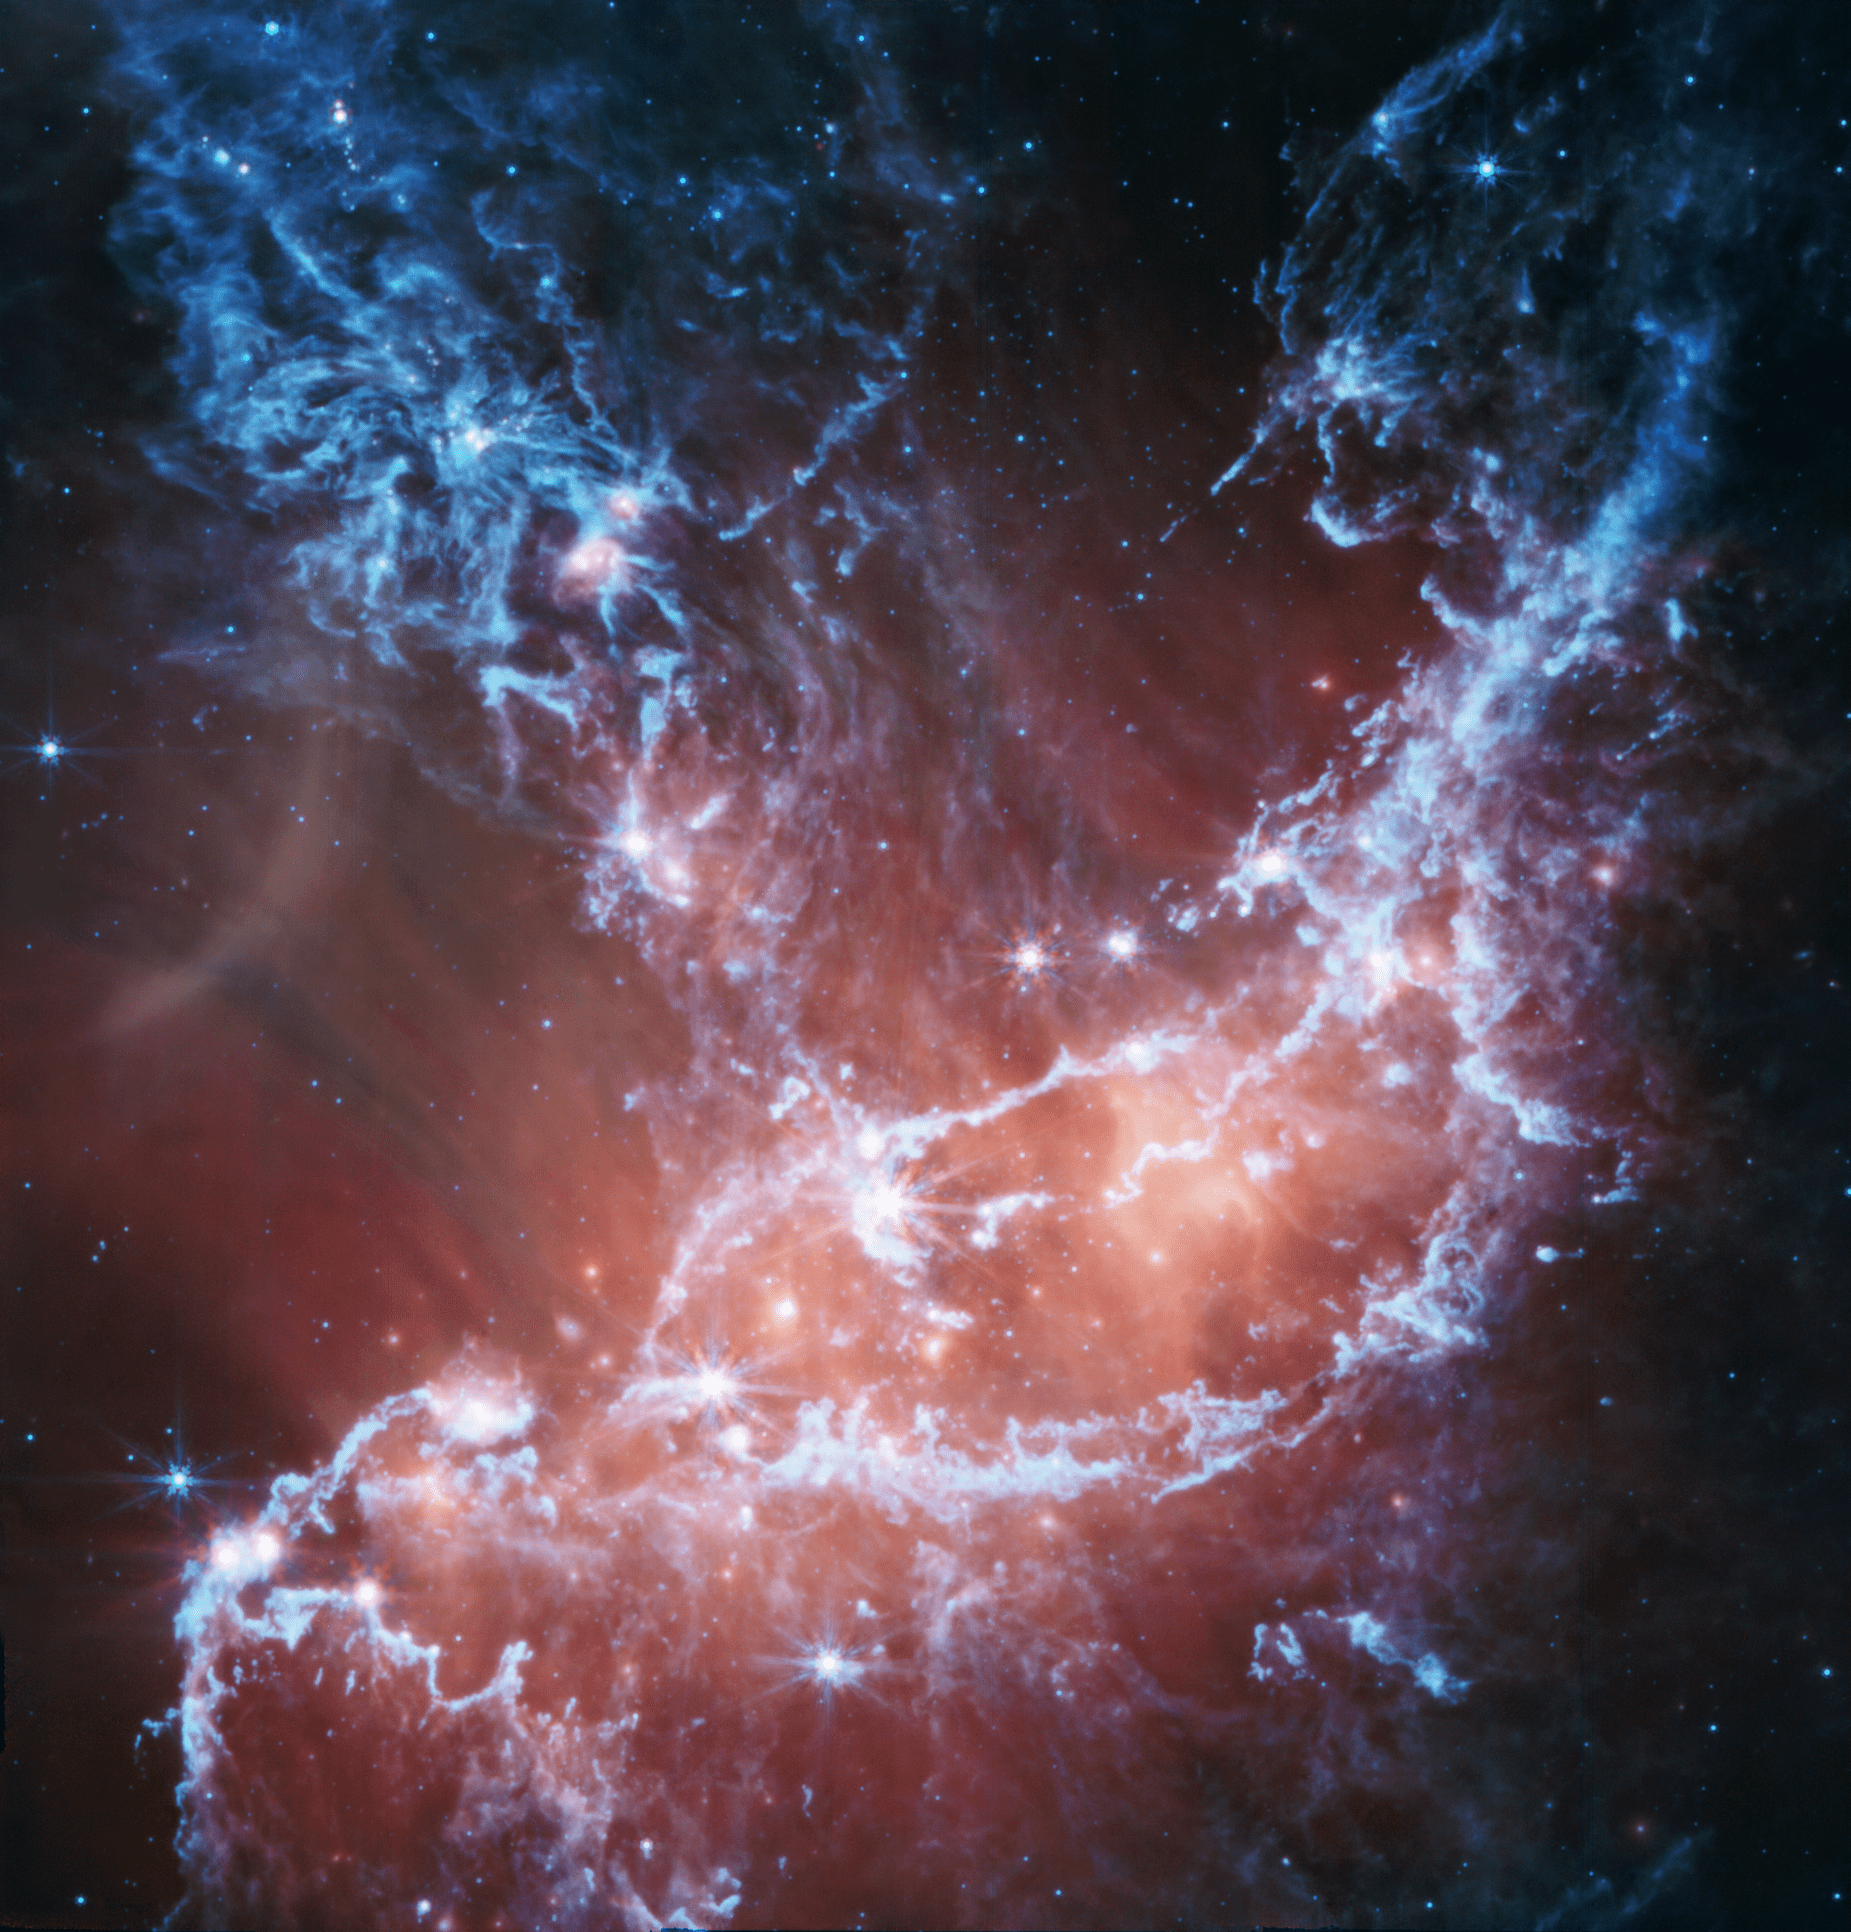 This new infrared image of NGC 346 from NASA’s James Webb Space Telescope’s Mid-Infrared Instrument (MIRI) traces emission from cool gas and dust. In this image blue represents silicates and sooty chemical molecules known as polycyclic aromatic hydrocarbons, or PAHs. More diffuse red emission shines from warm dust heated by the brightest and most massive stars in the heart of the region. Bright patches and filaments mark areas with abundant numbers of protostars.